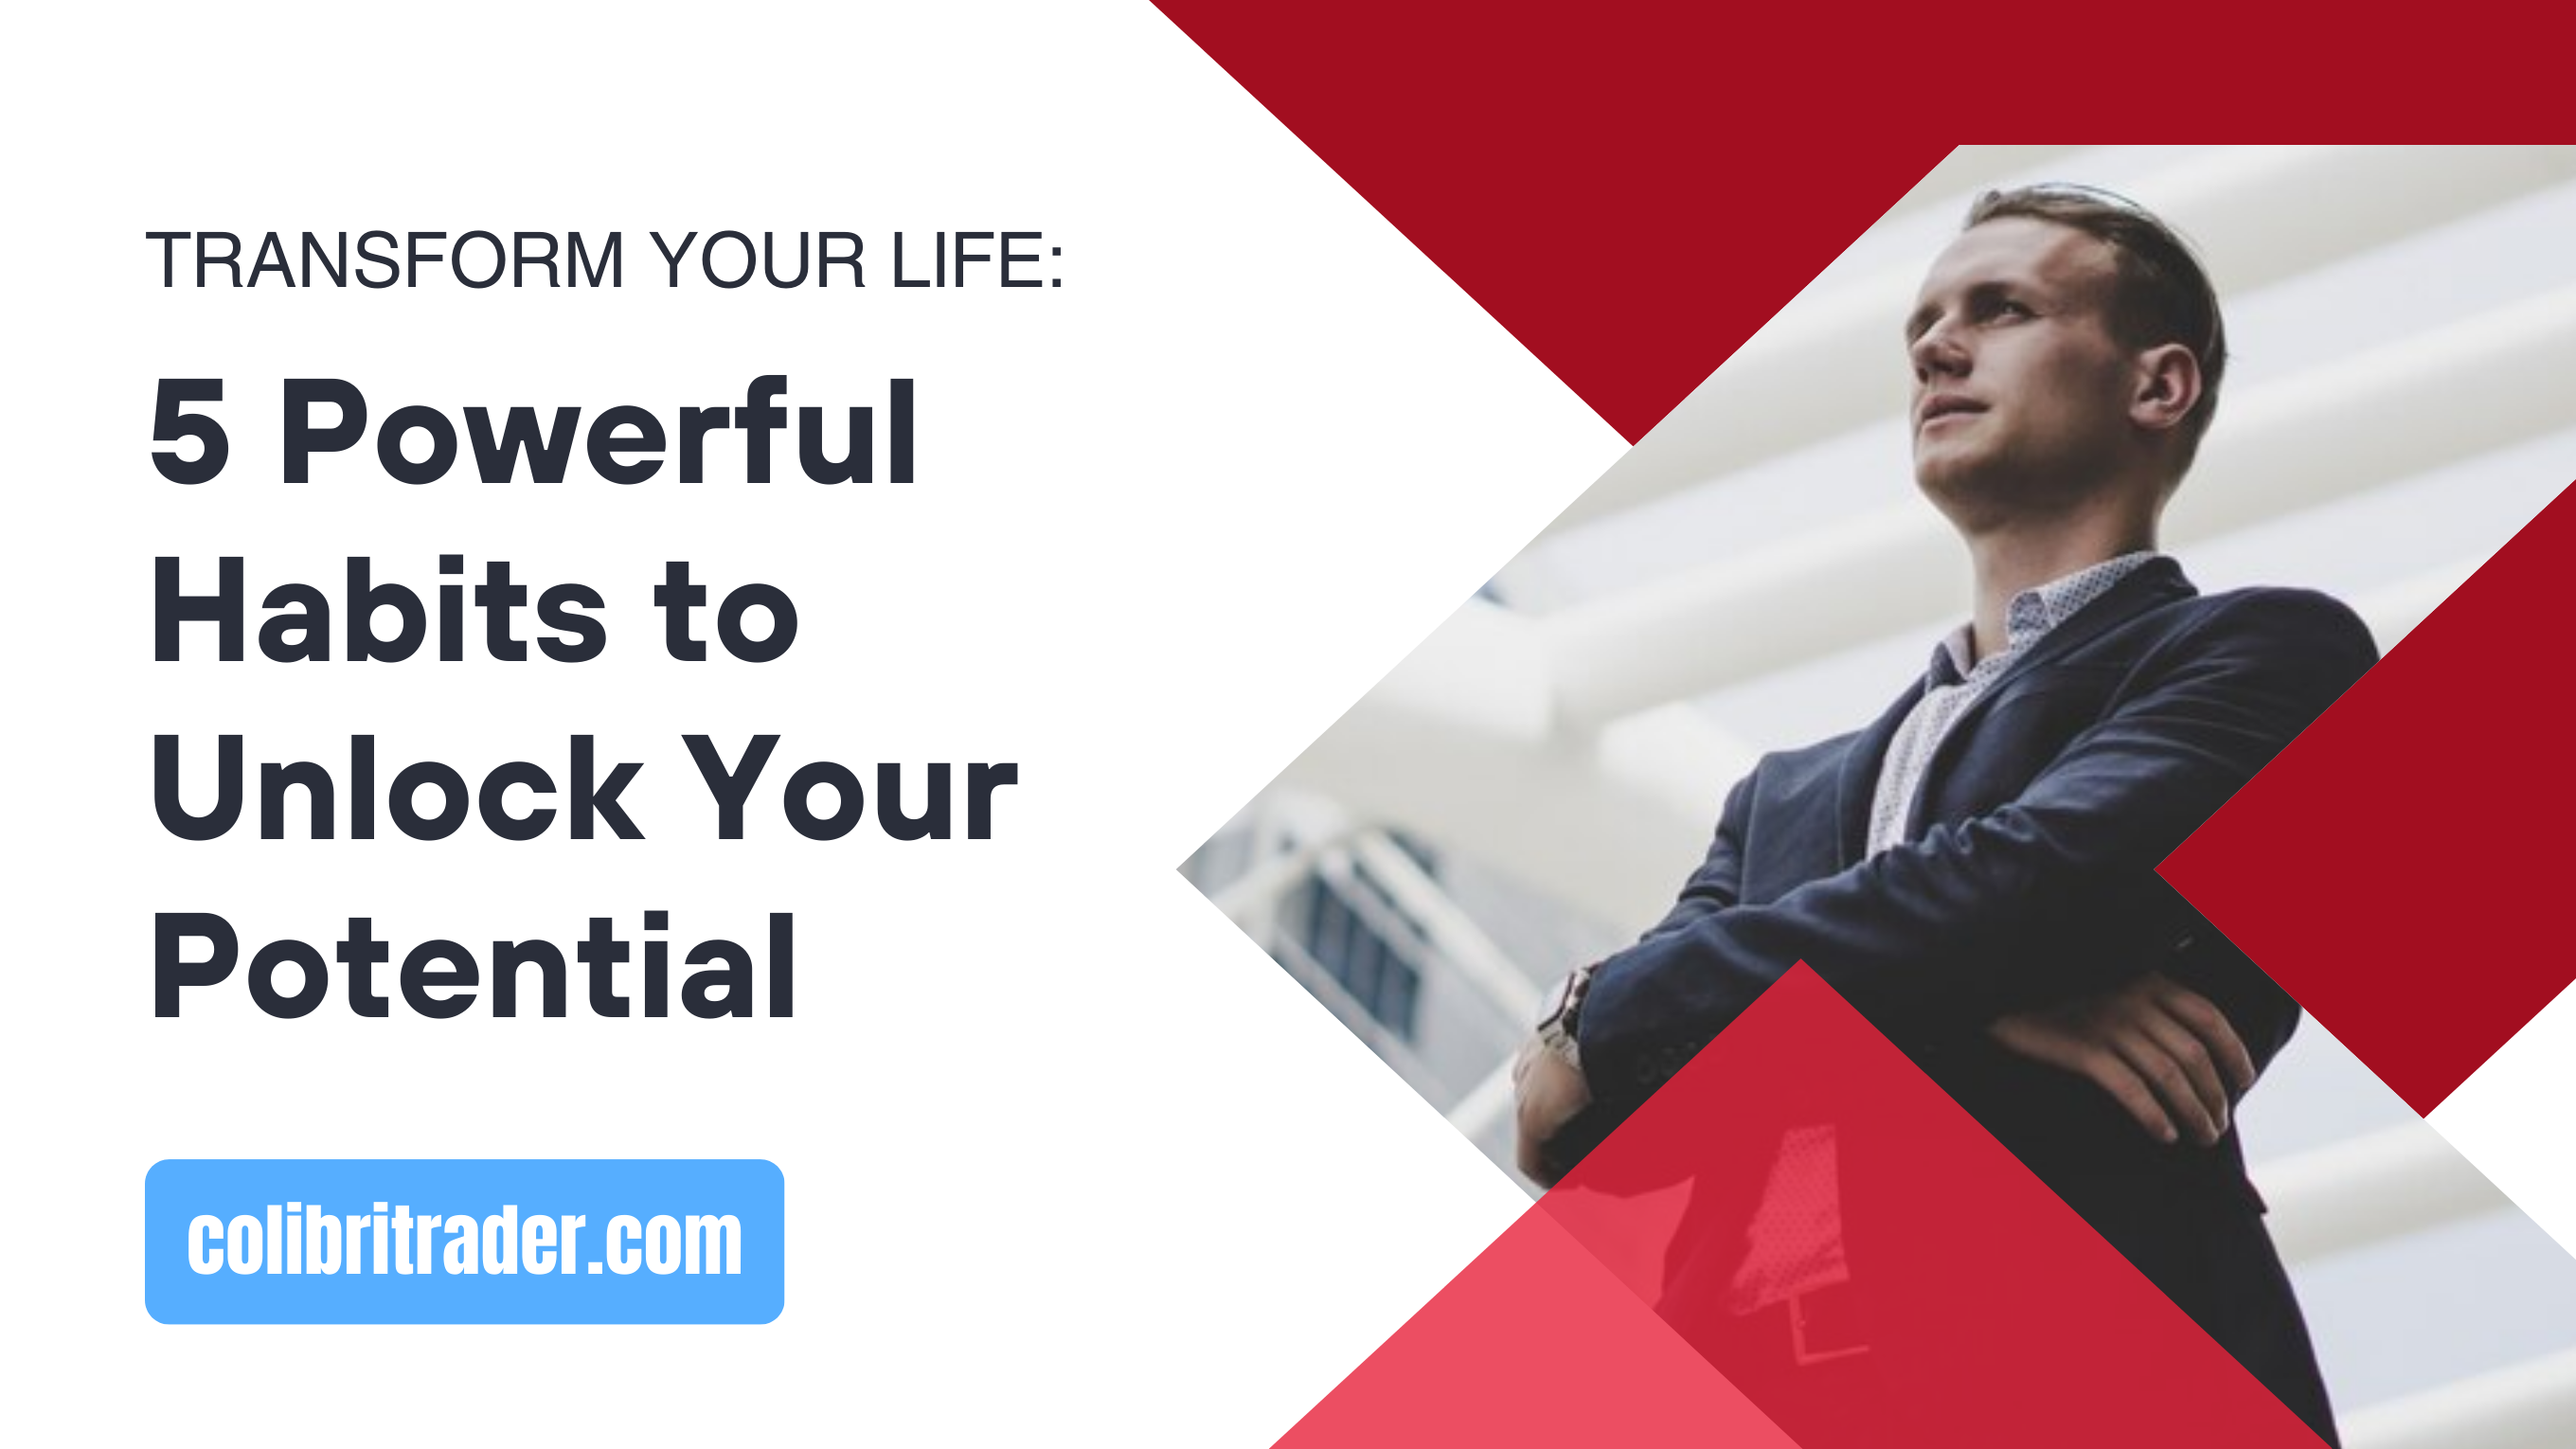 Transform Your Life: 5 Powerful Habits to Unlock Your Potential